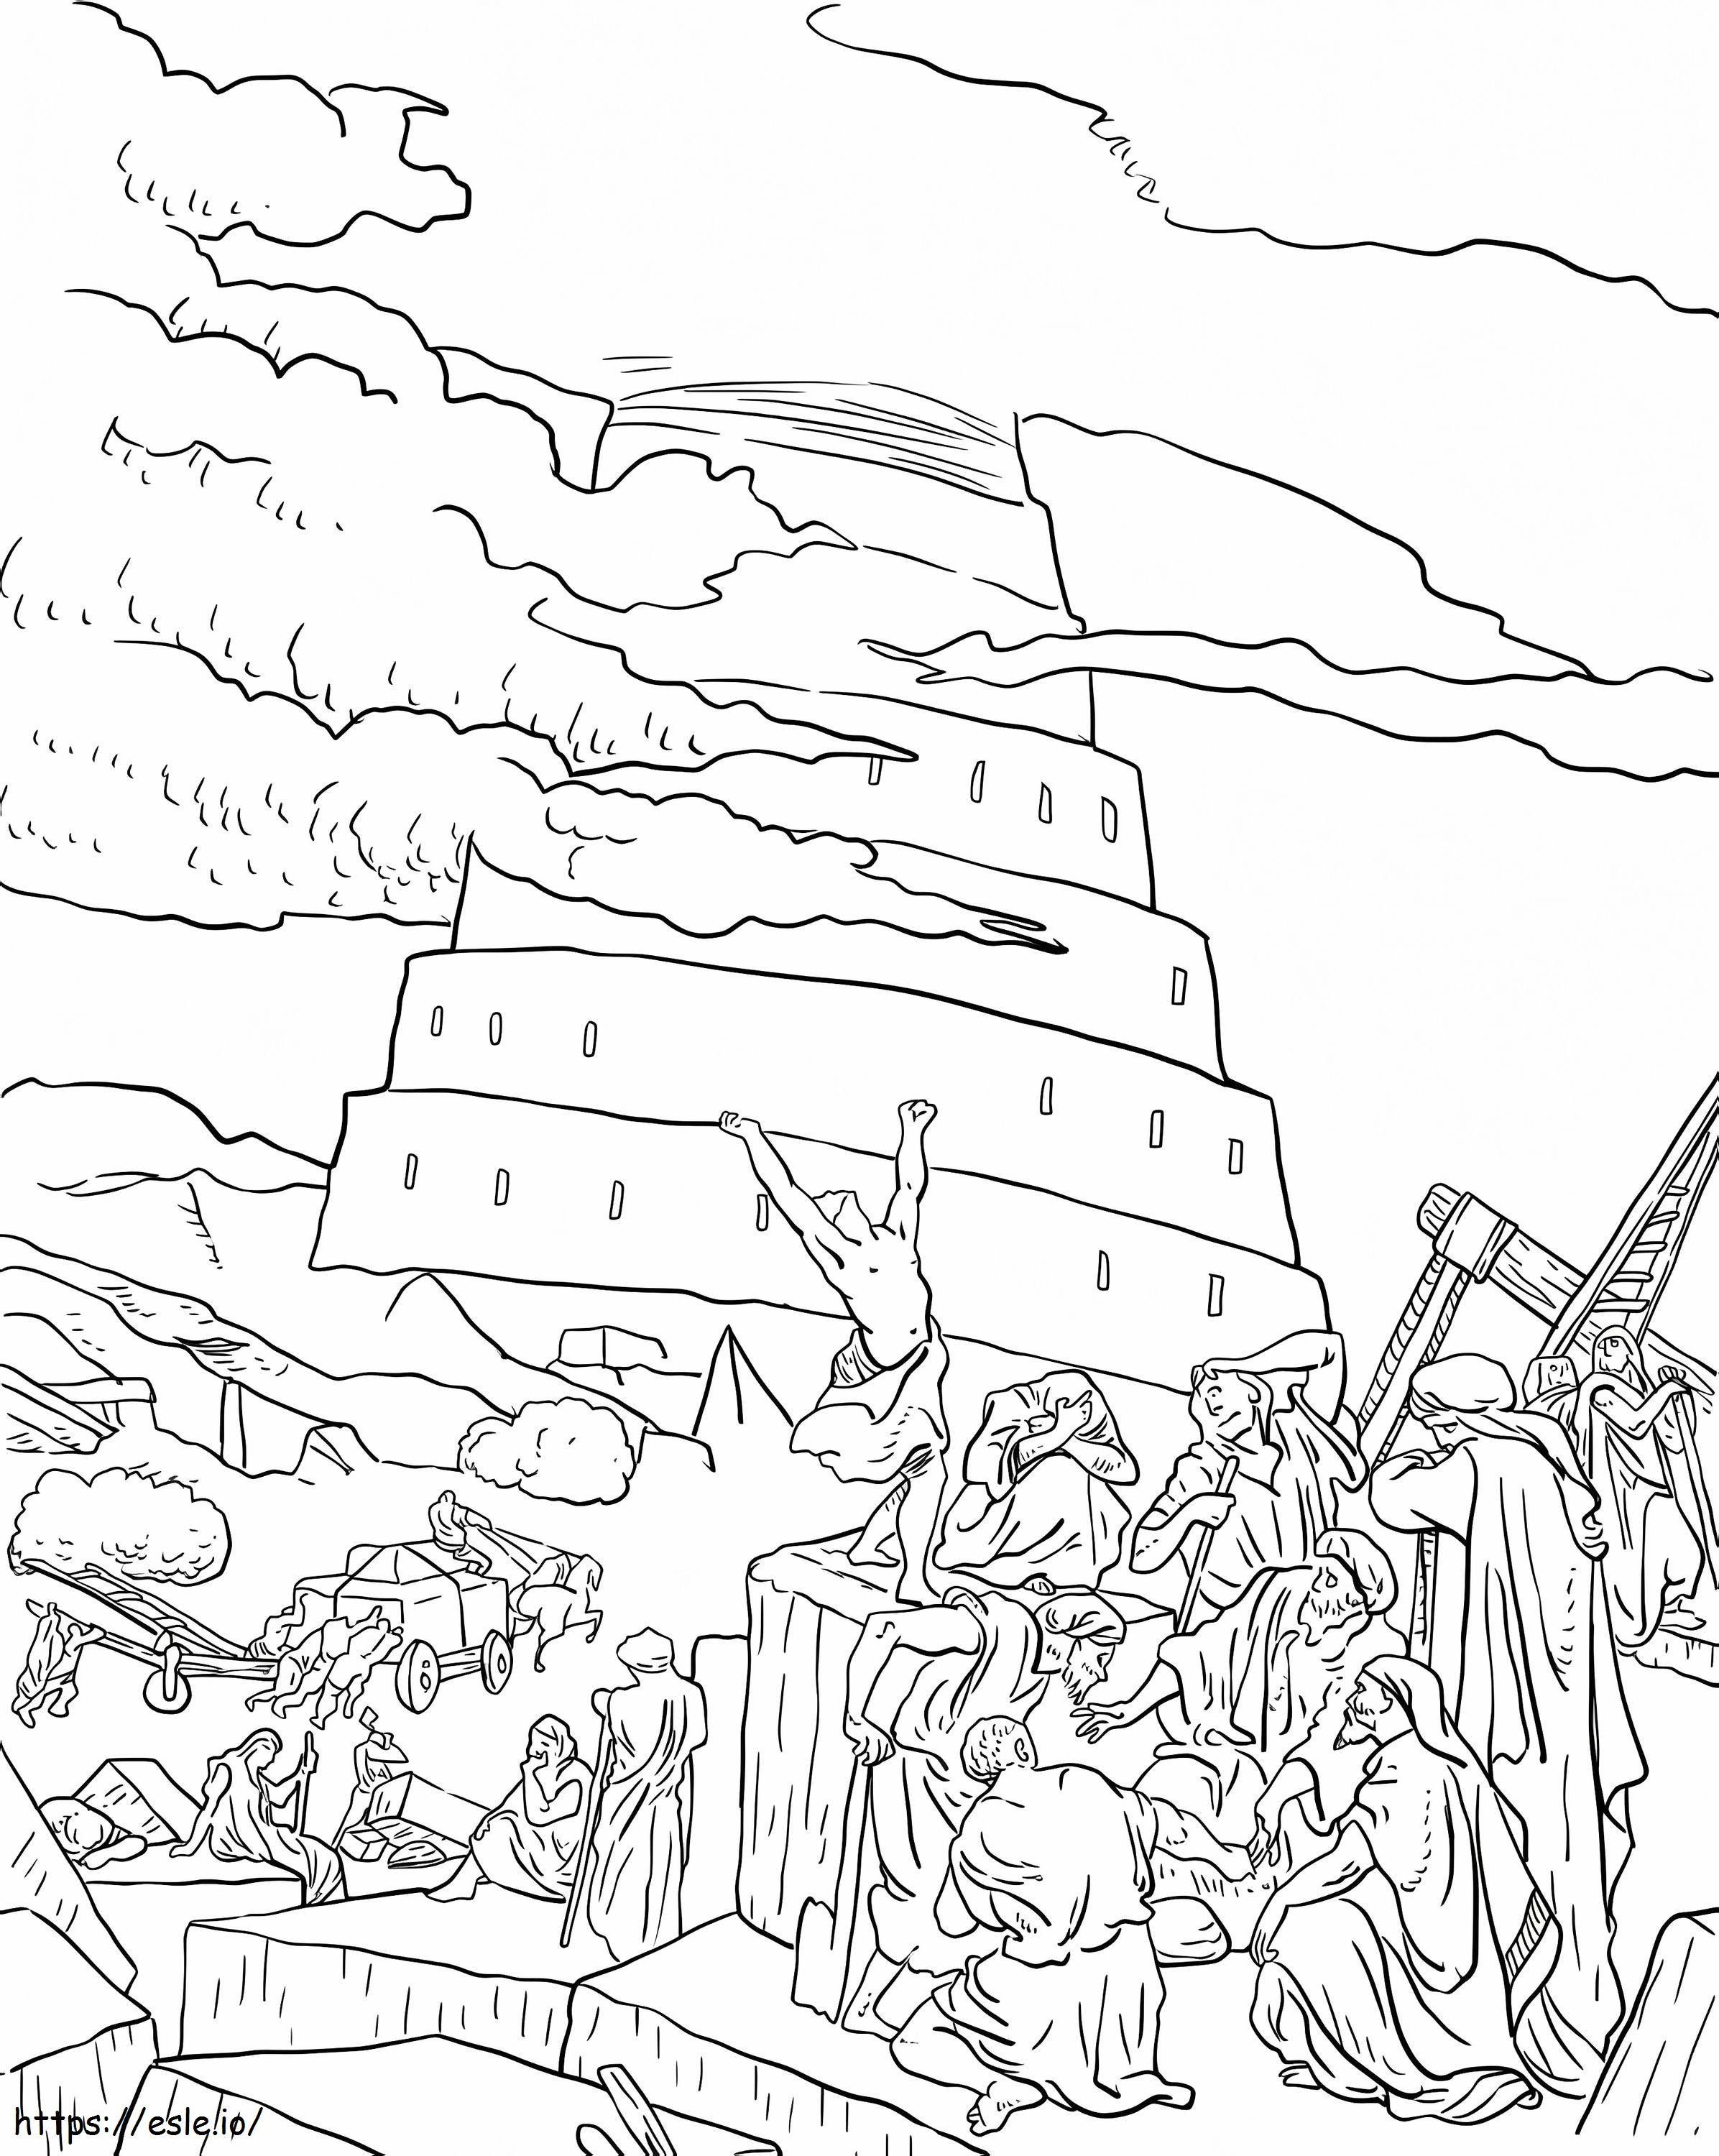 Tower Of Babel 7 coloring page